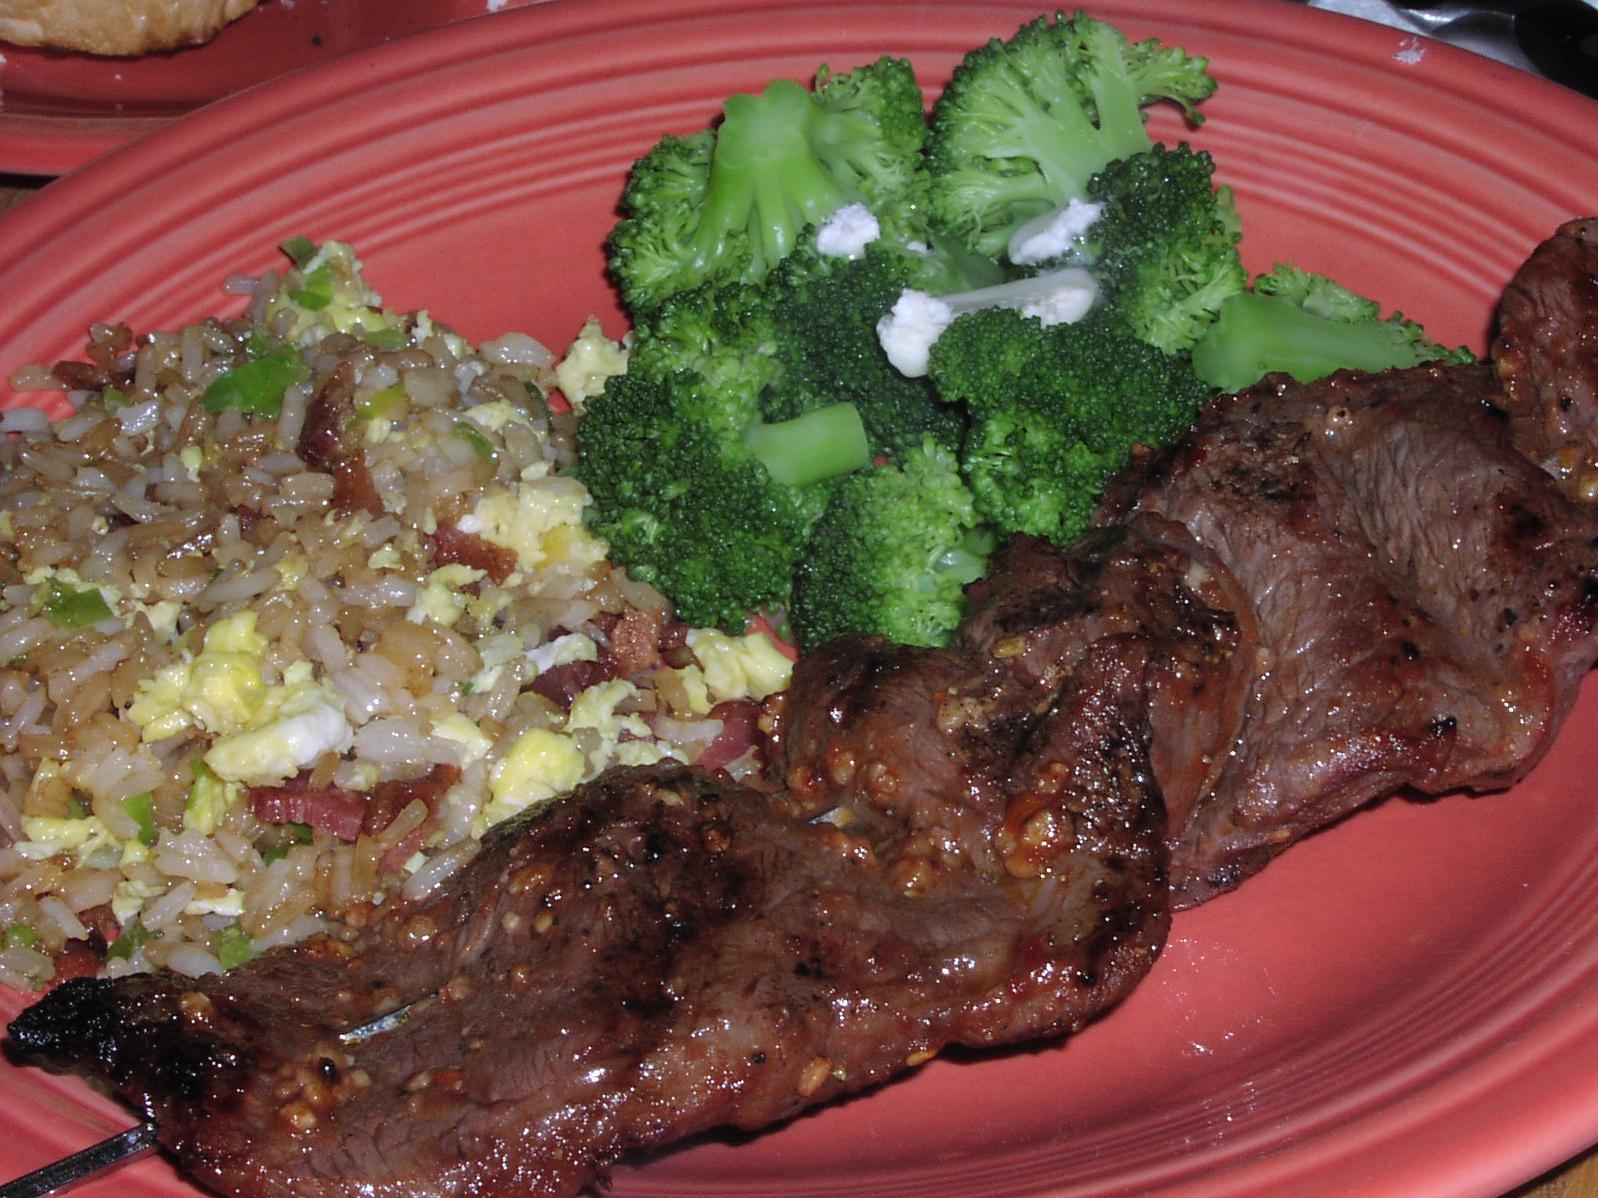  Grilling up some South American flavor with this Churrasco recipe.